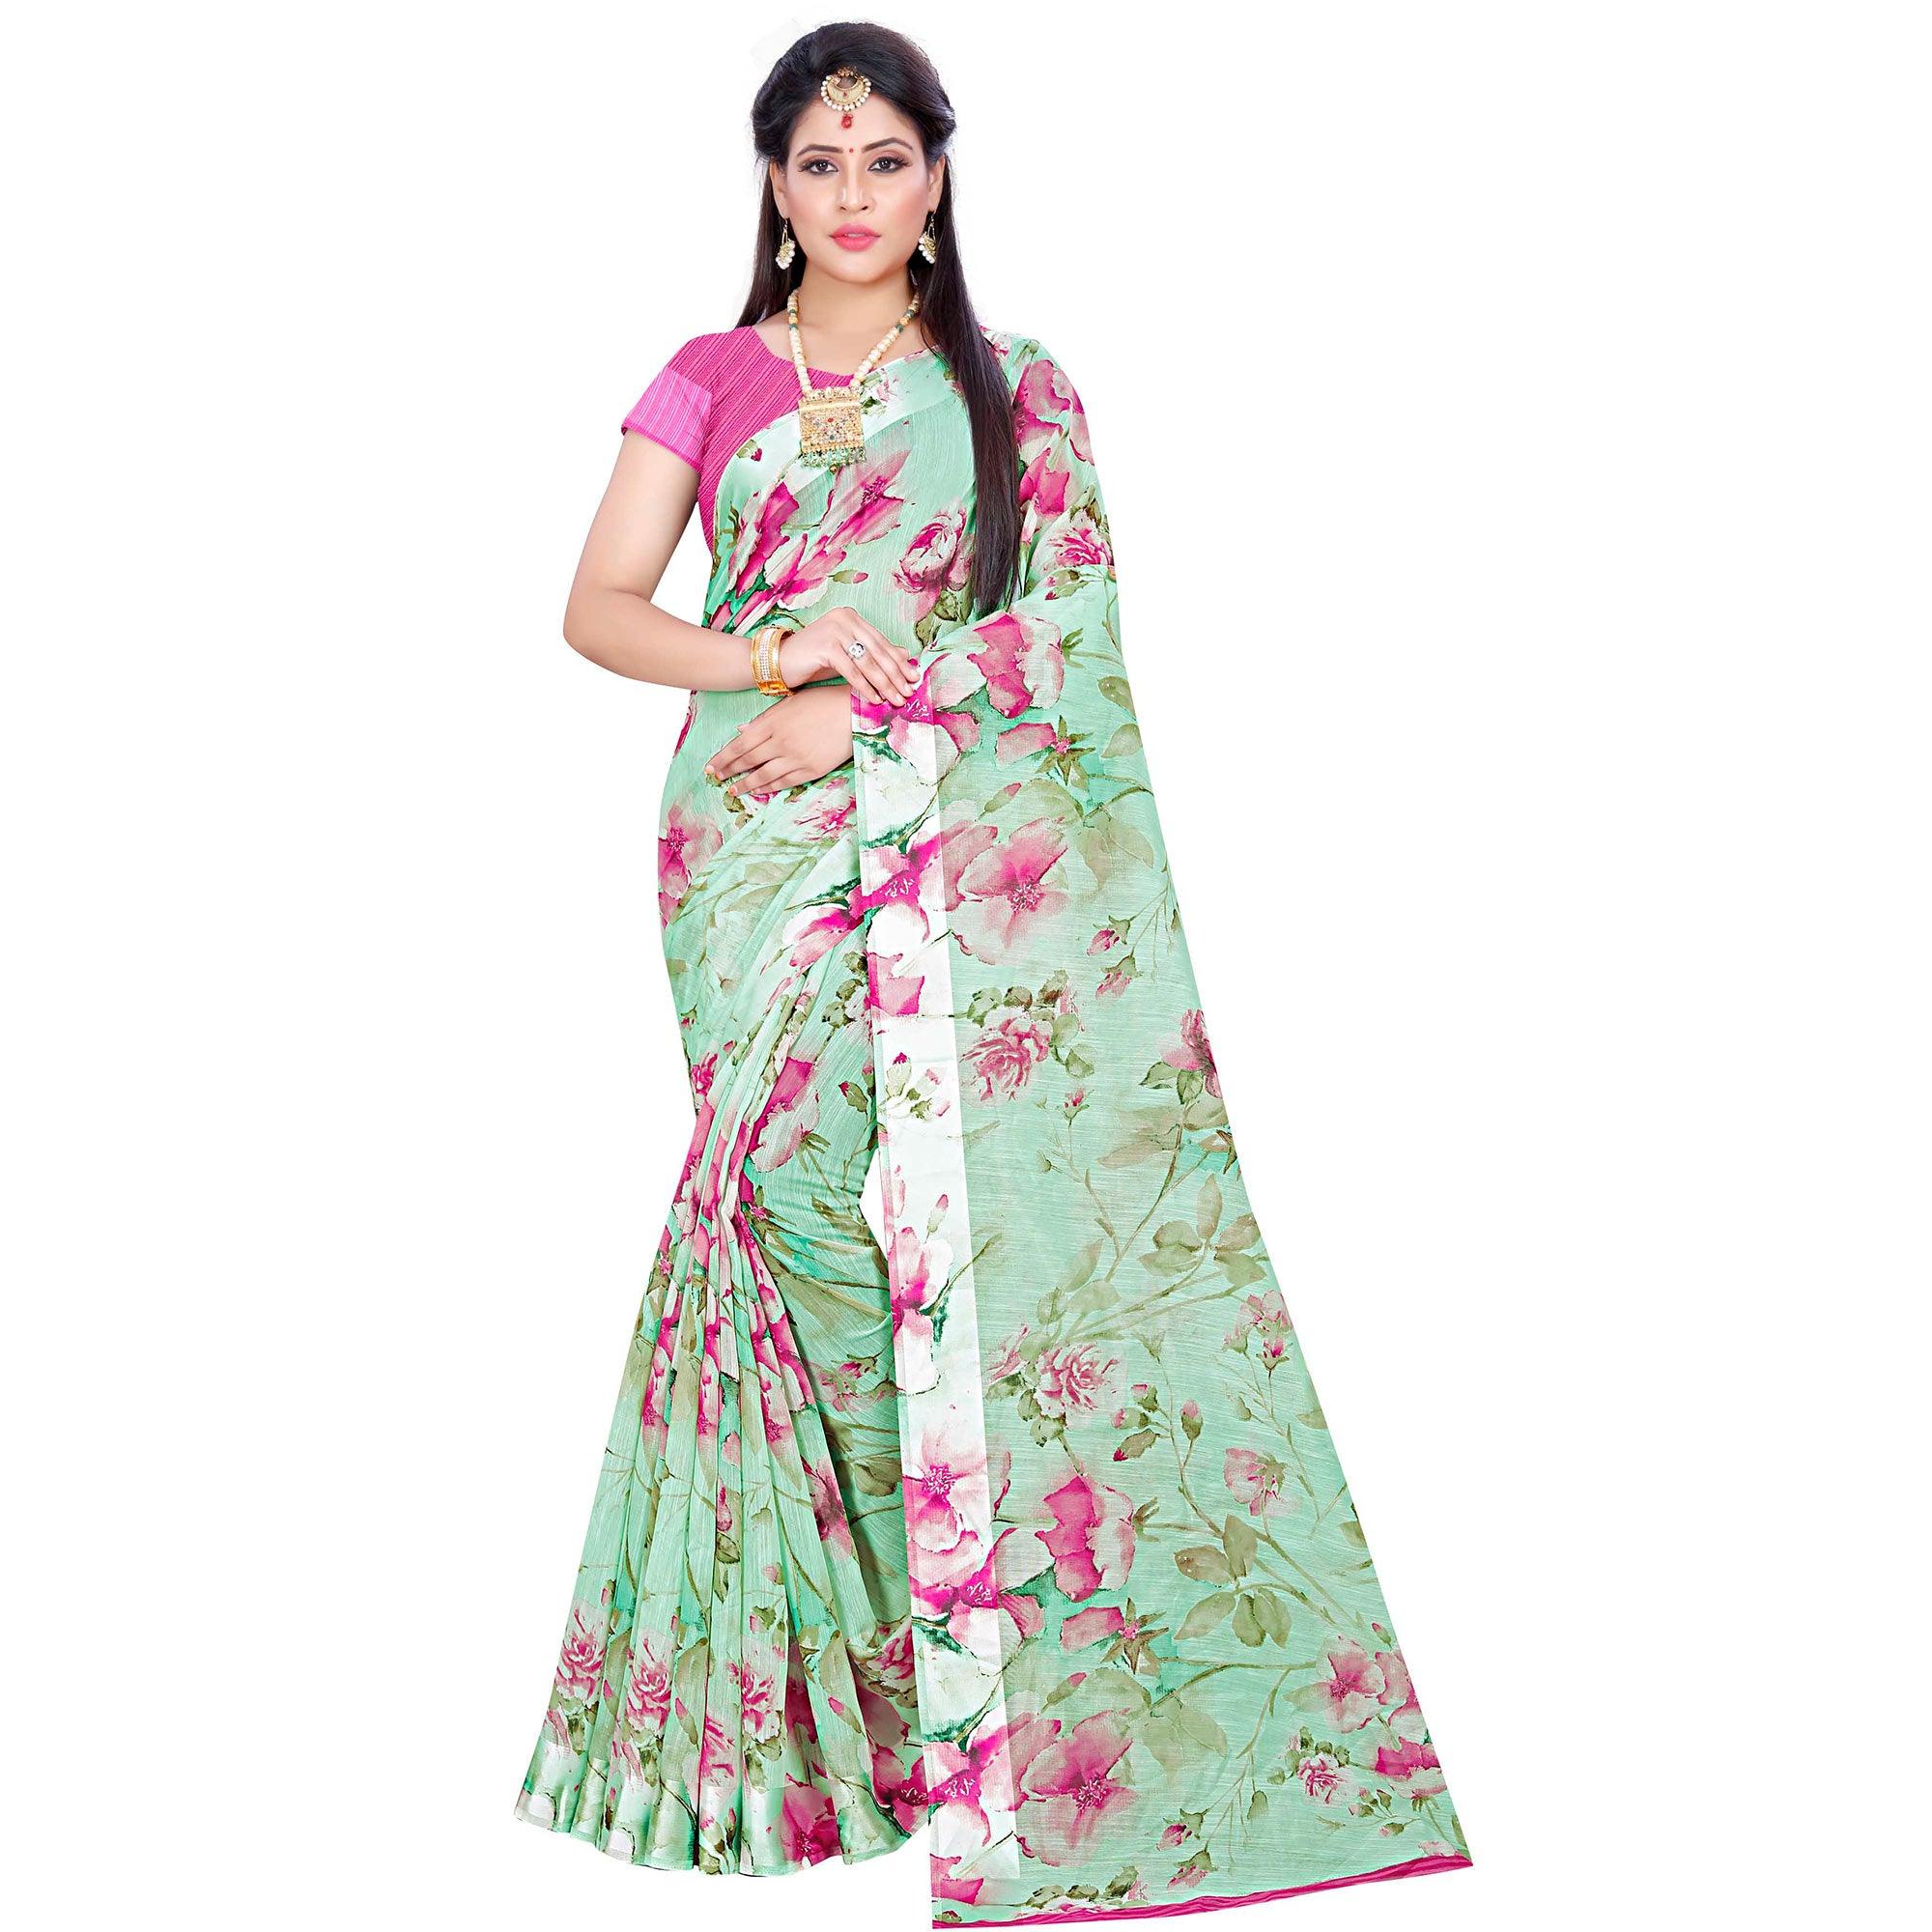 Groovy Green Colored Casual Wear Floral Printed Linen Saree - Peachmode